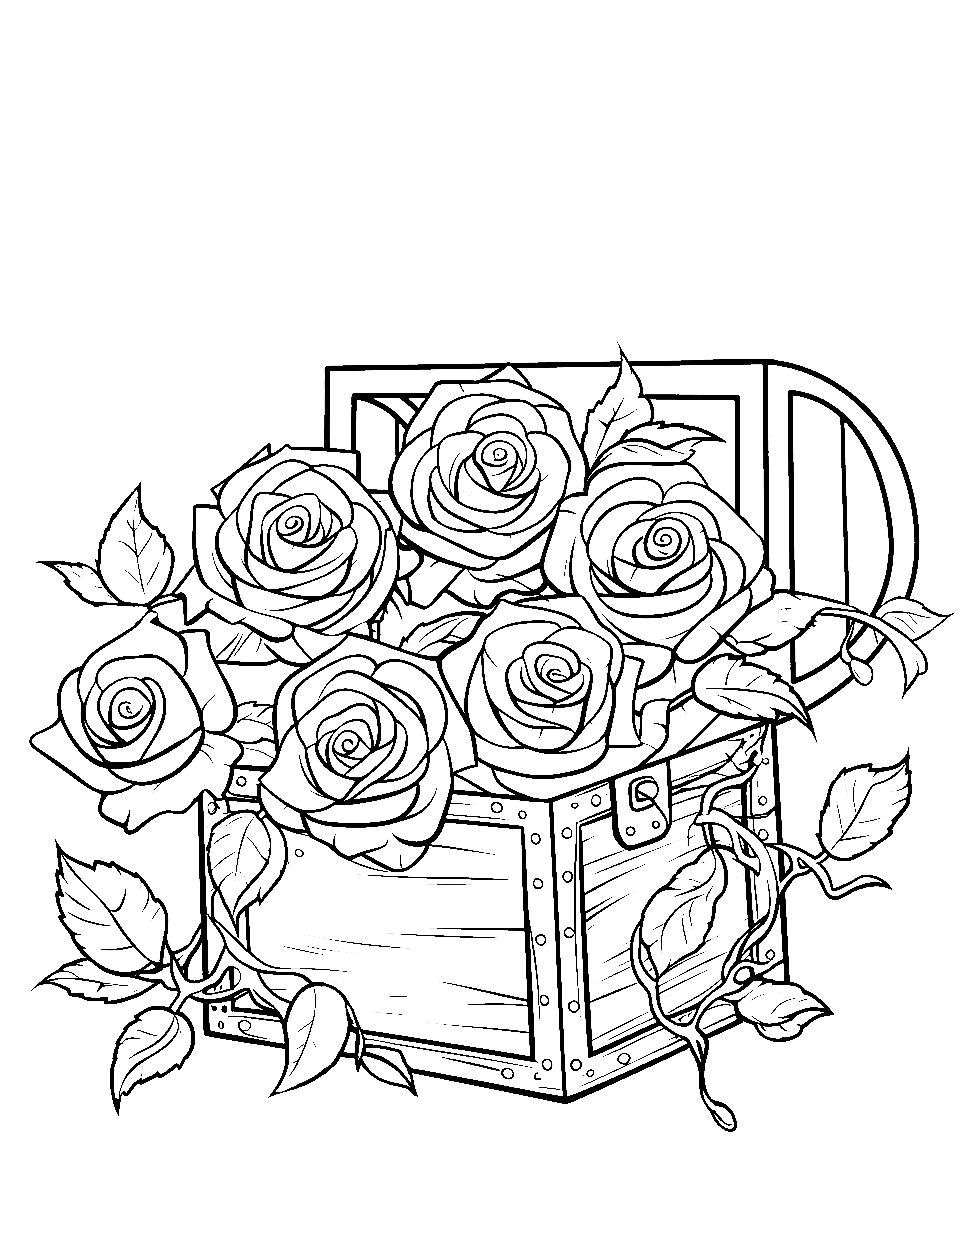 Treasure Chest with Roses Coloring Page - An open treasure chest with roses spilling out of it.